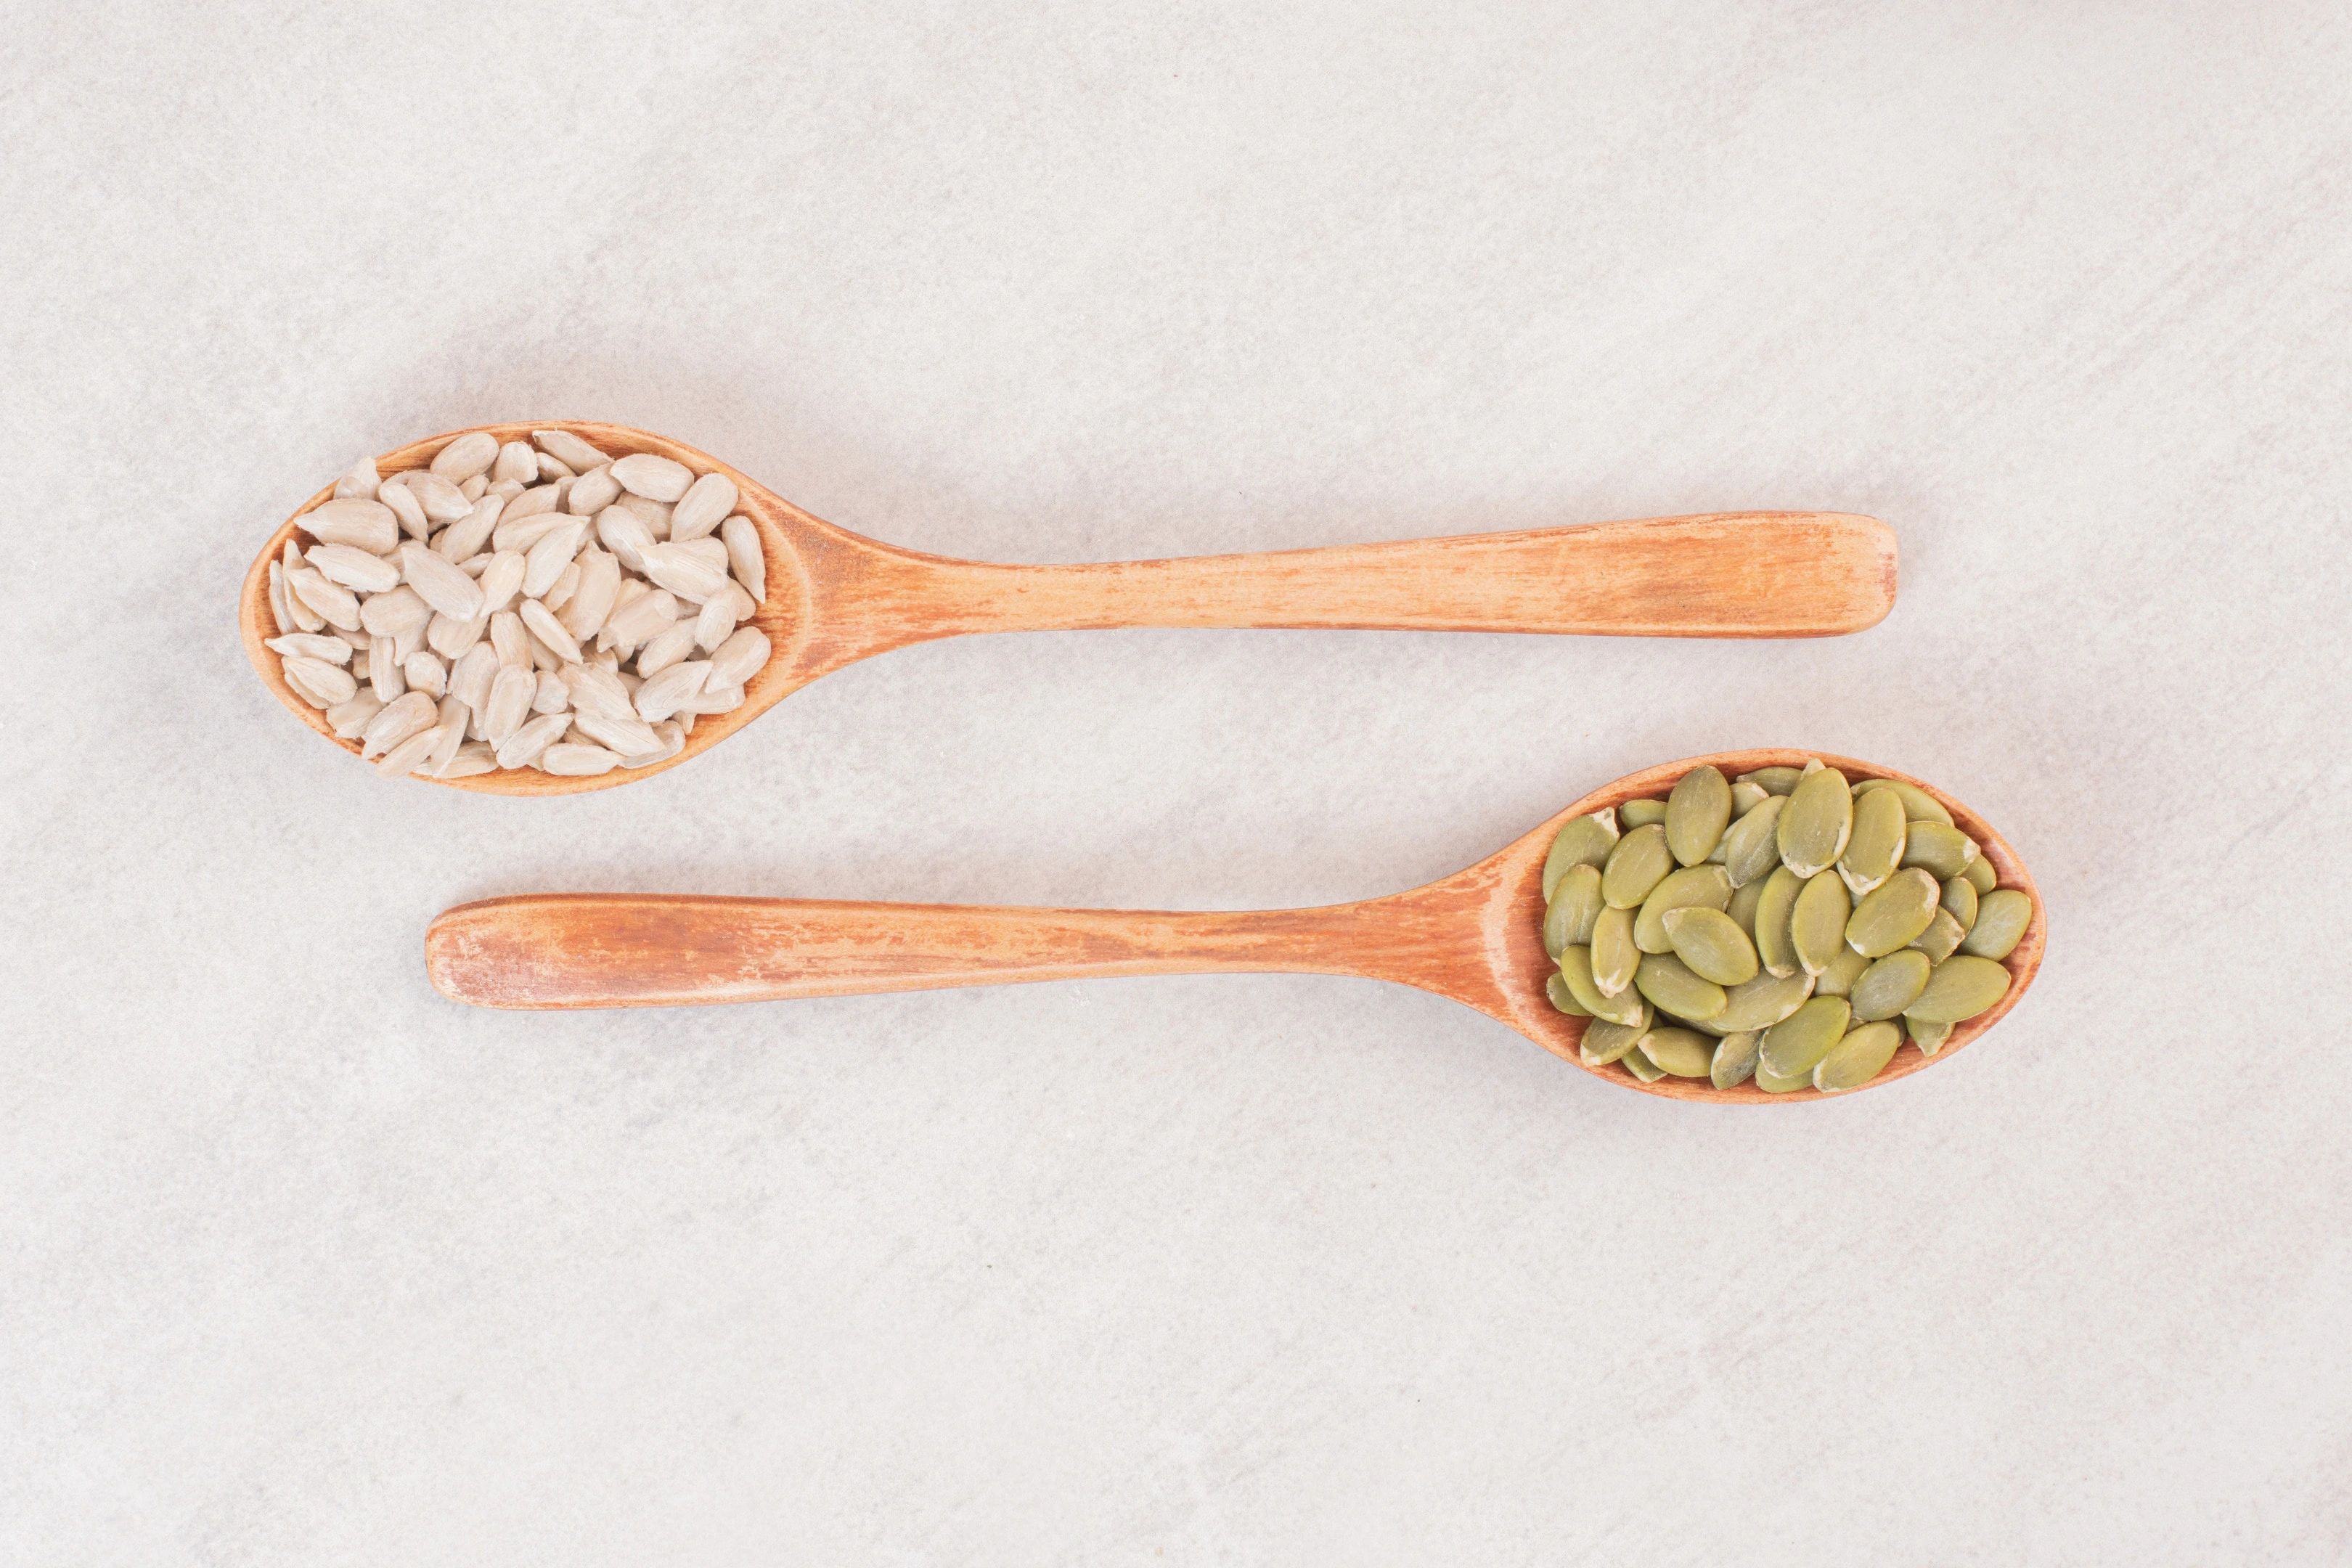 Two wooden spoon with sunflower and pumpkin seeds on white surface